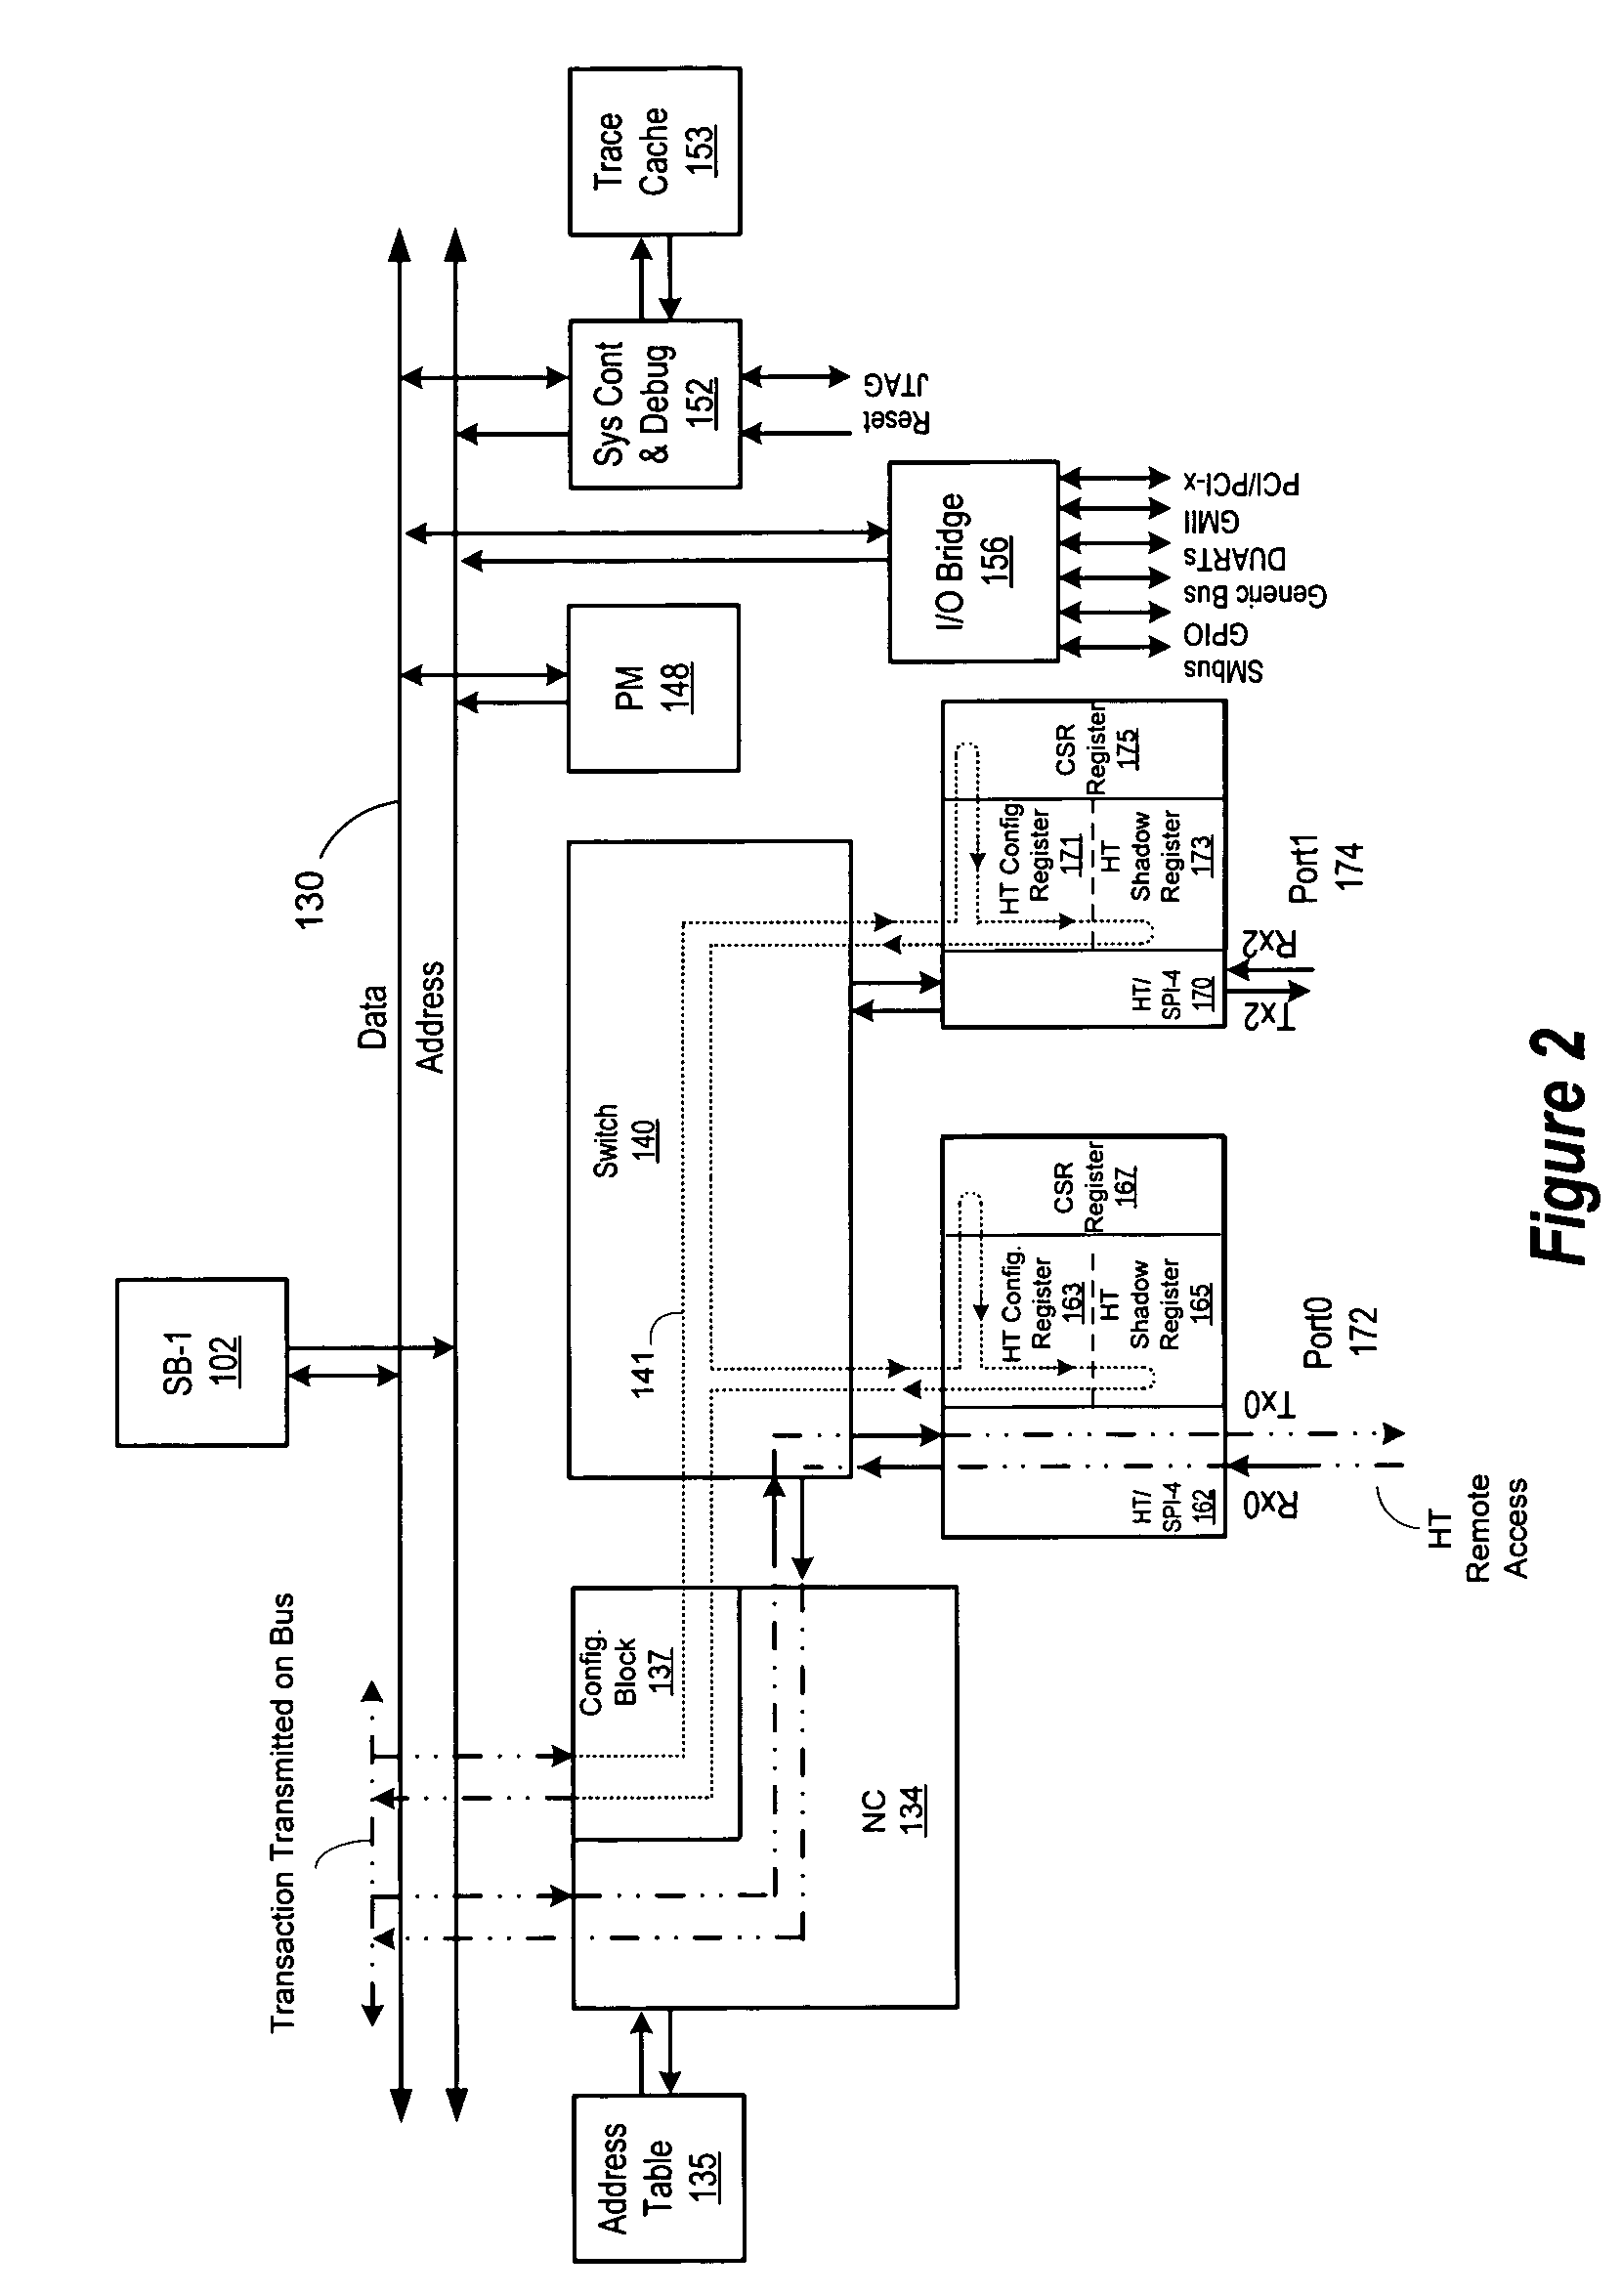 Distributed copies of configuration information using token ring